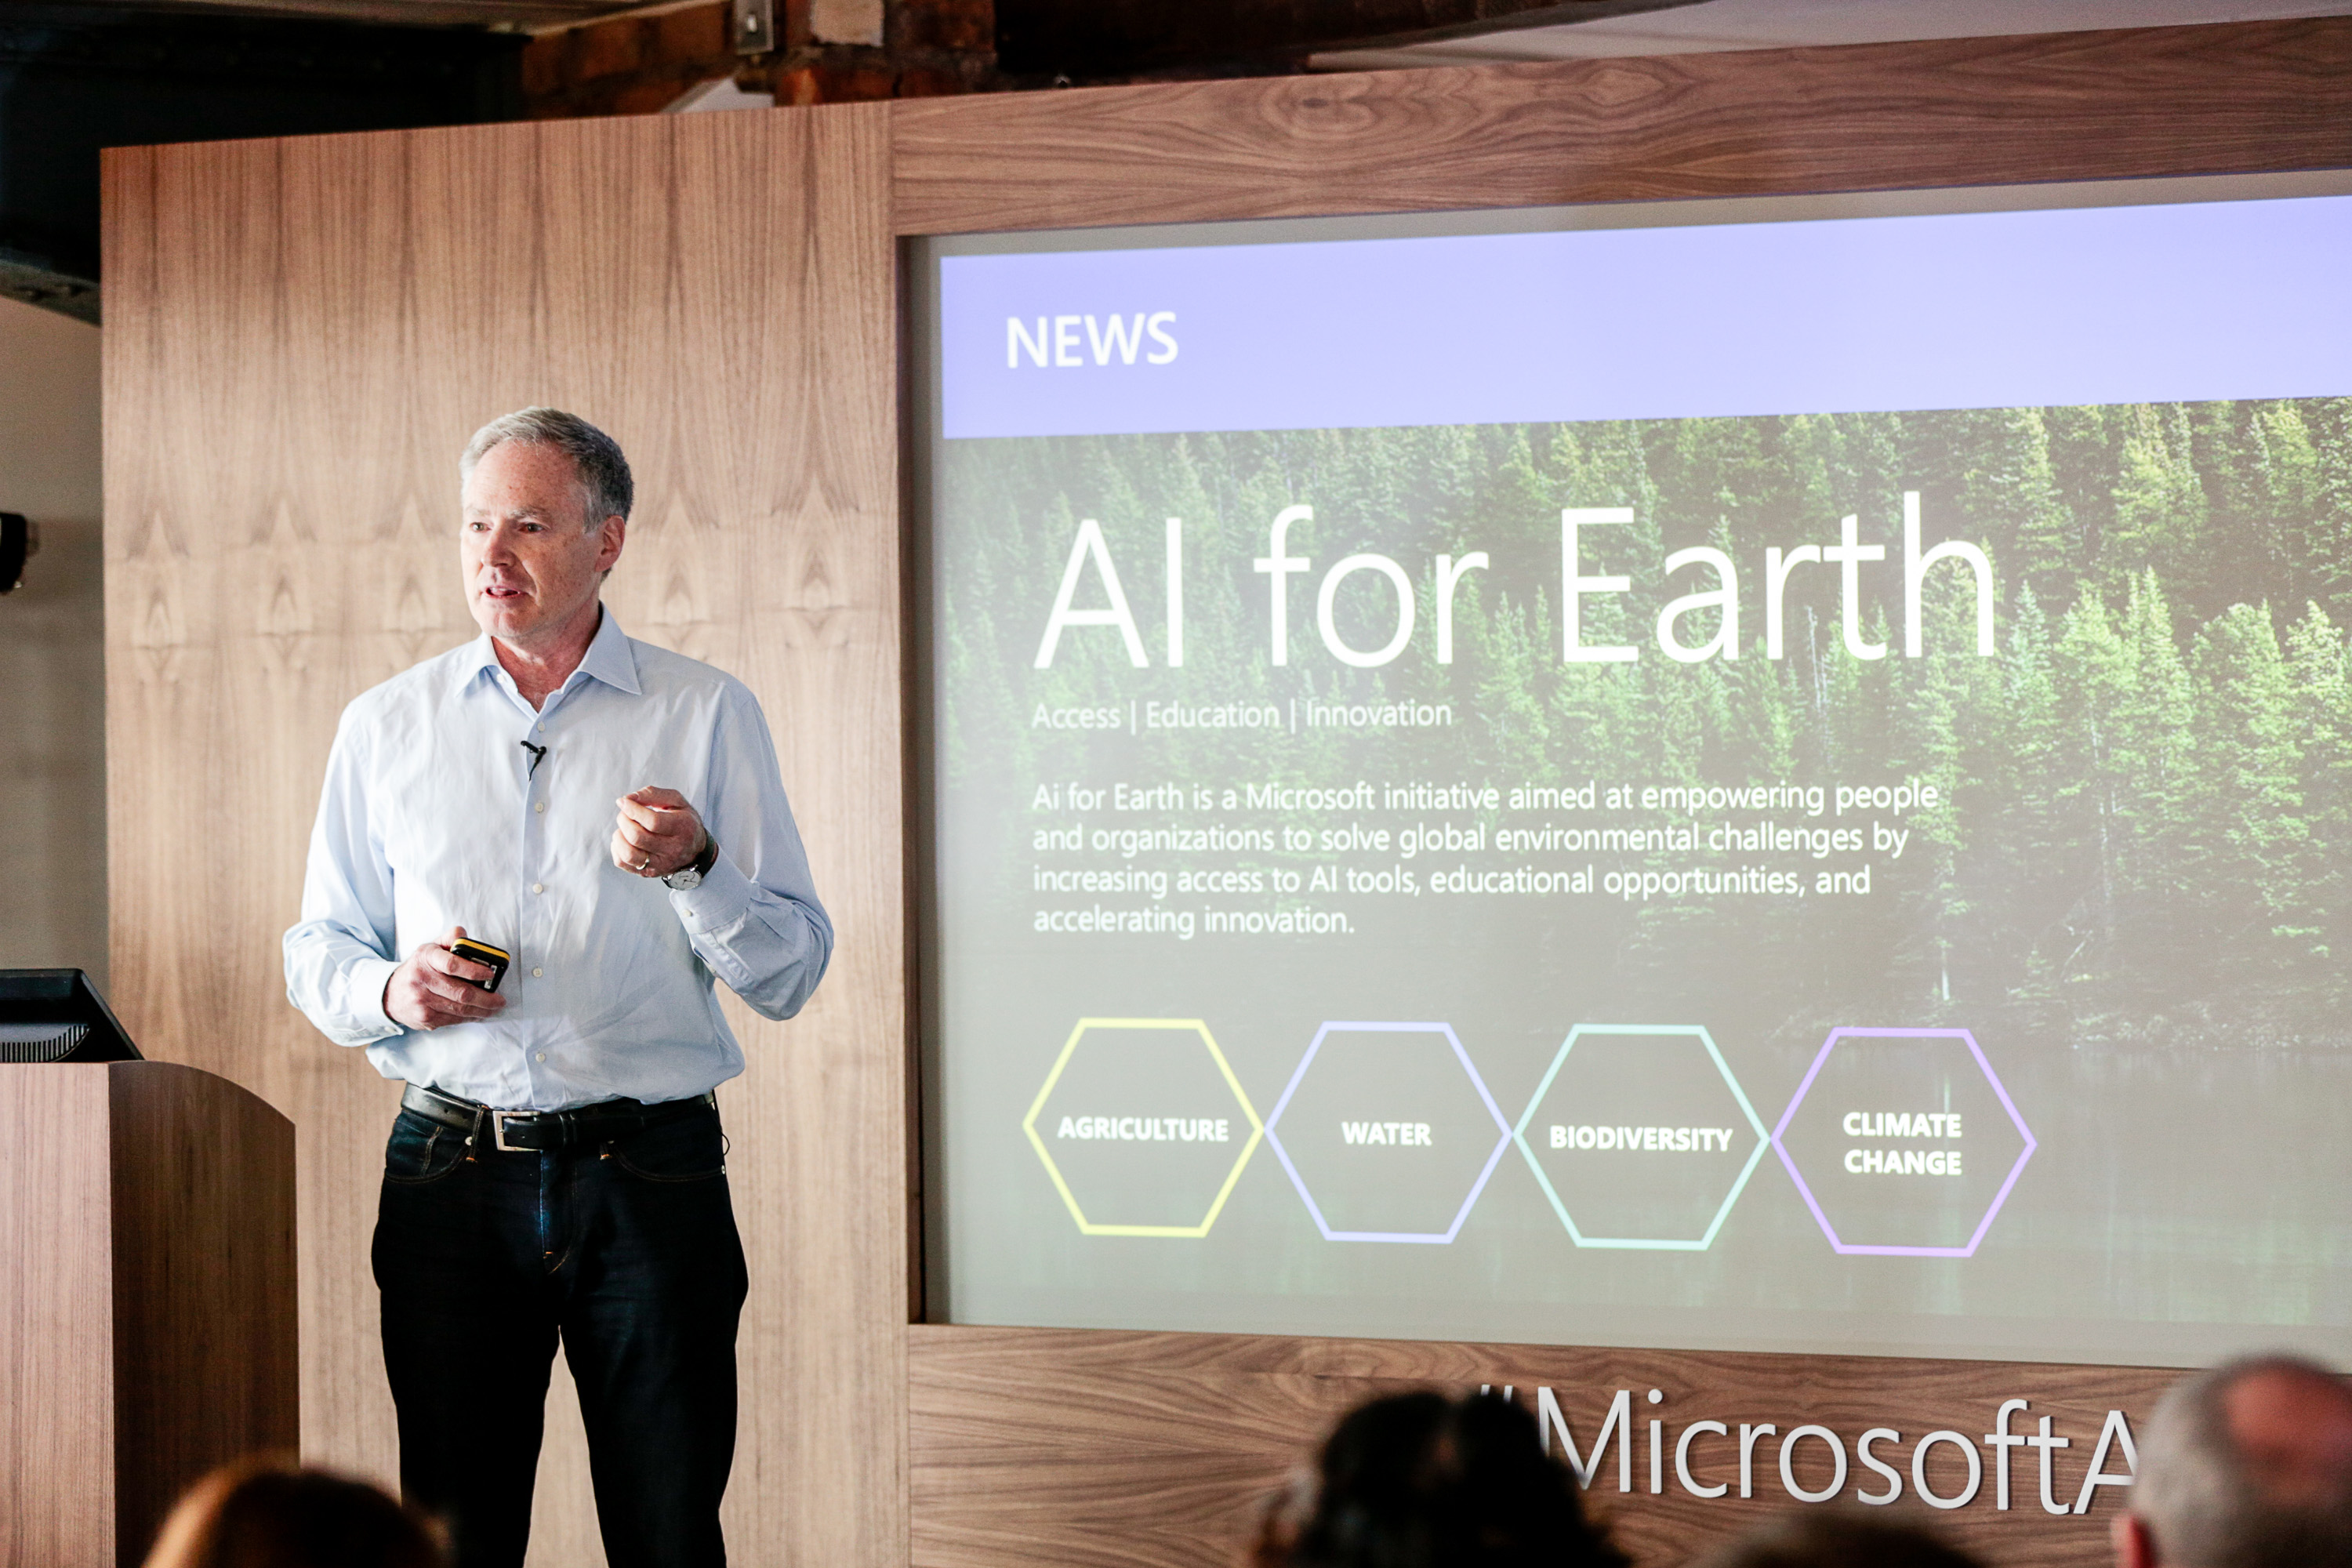 Eric Horvitz, Technical Fellow and Director at Microsoft Research Labs